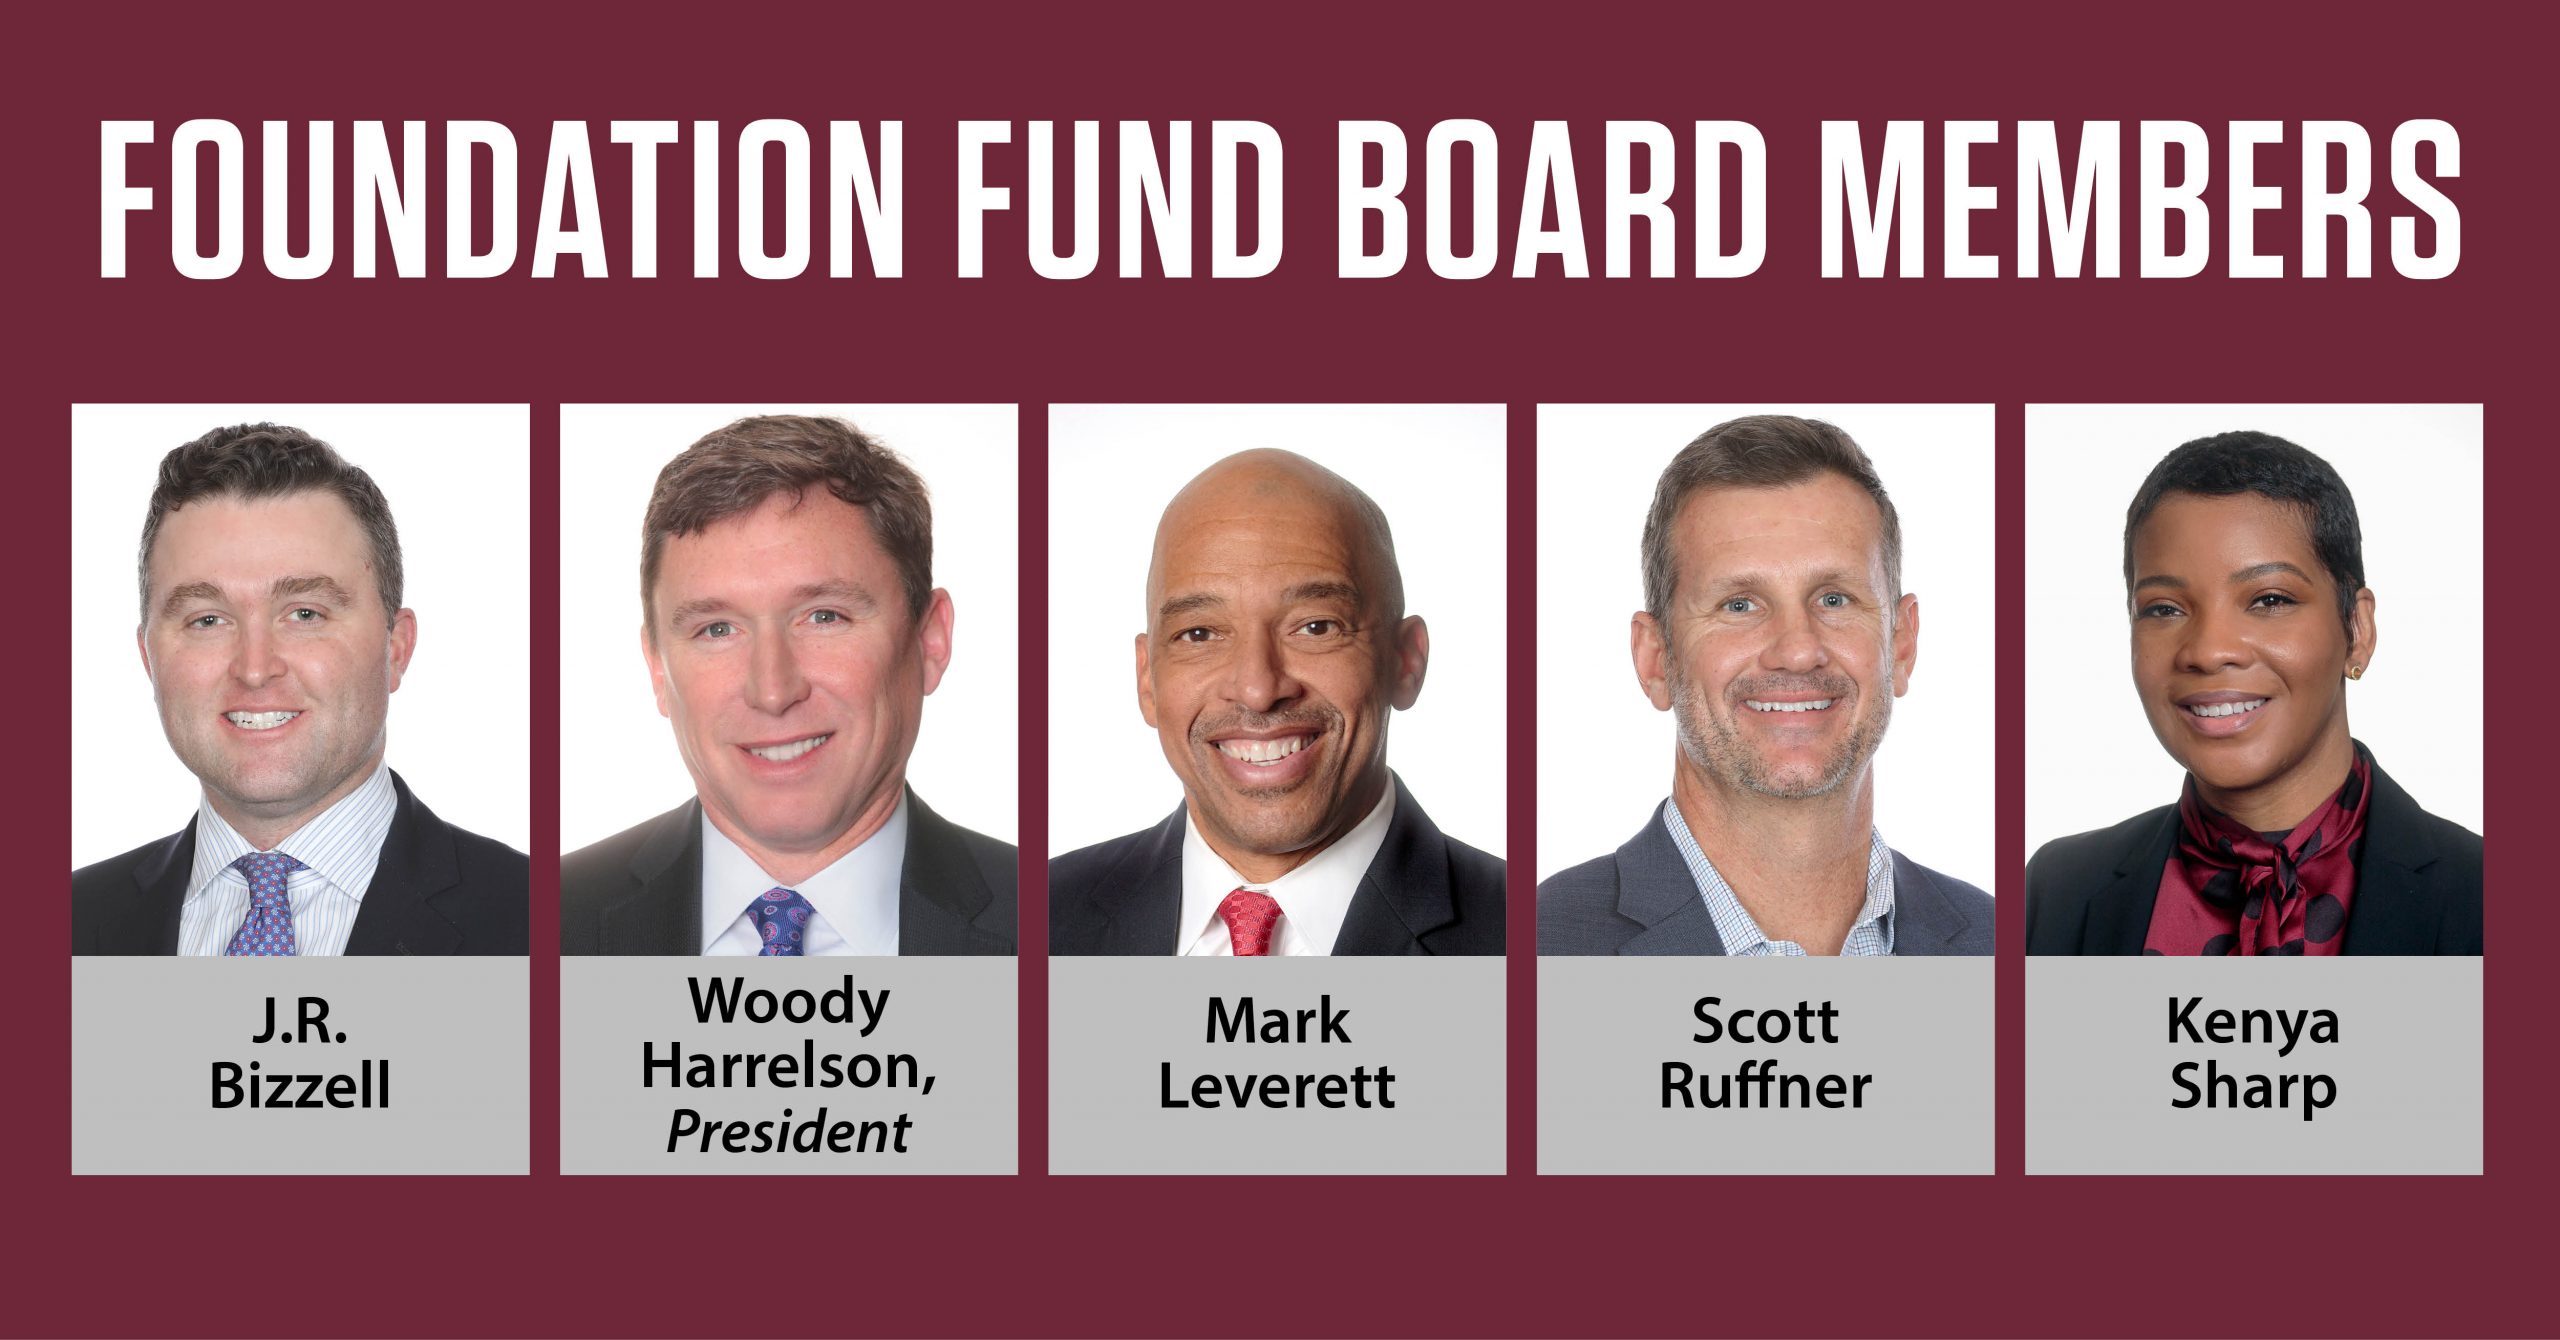 The University of Arkansas at Little Rock has announced four new members who will serve three-year terms on the UA Little Rock Foundation Fund Board.